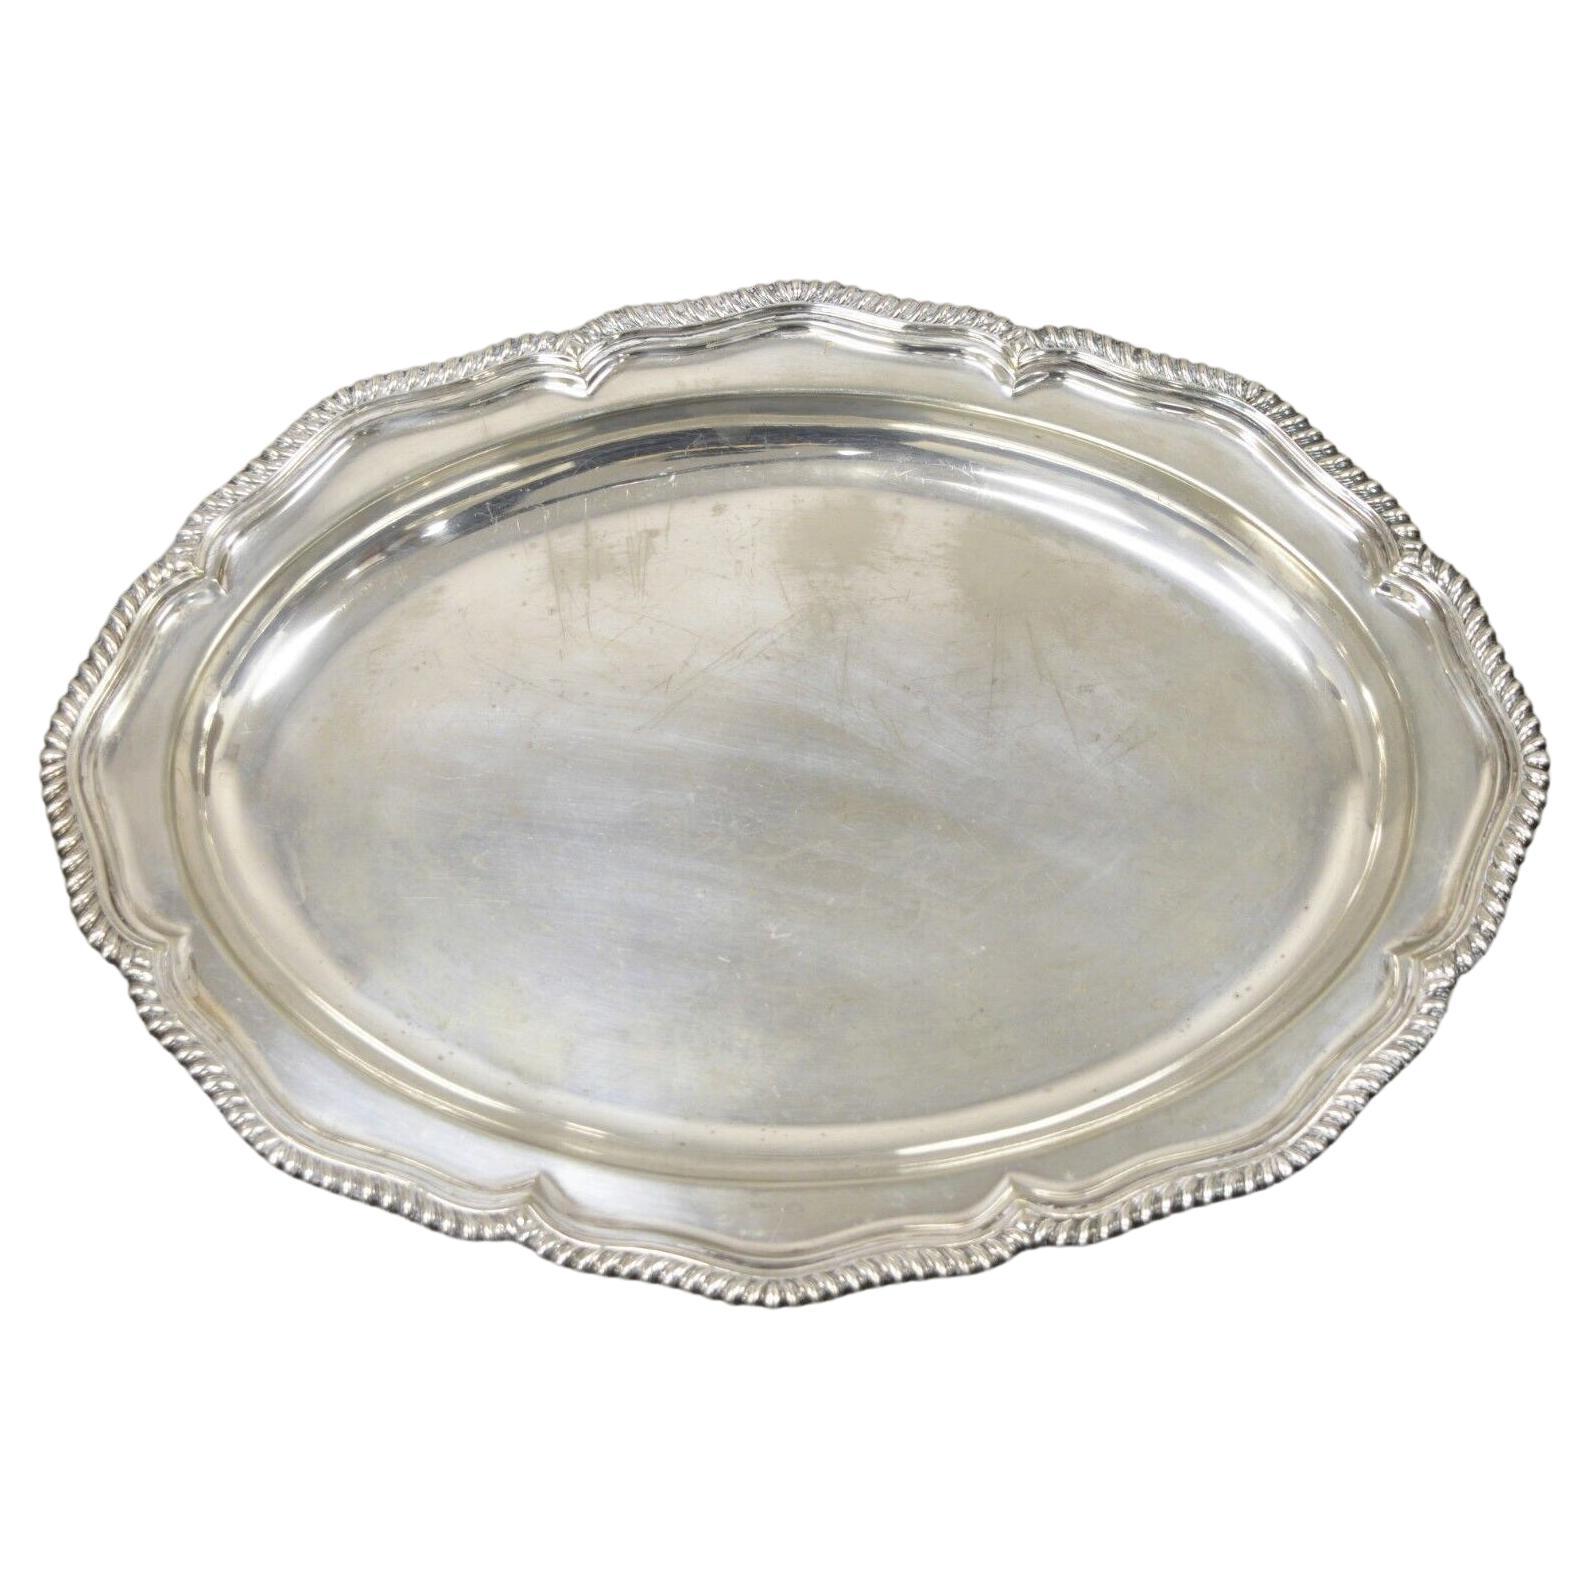 Tiffany & Co. Makers Silver Soldered Oval Vegetable Serving Dish Silver Plate For Sale